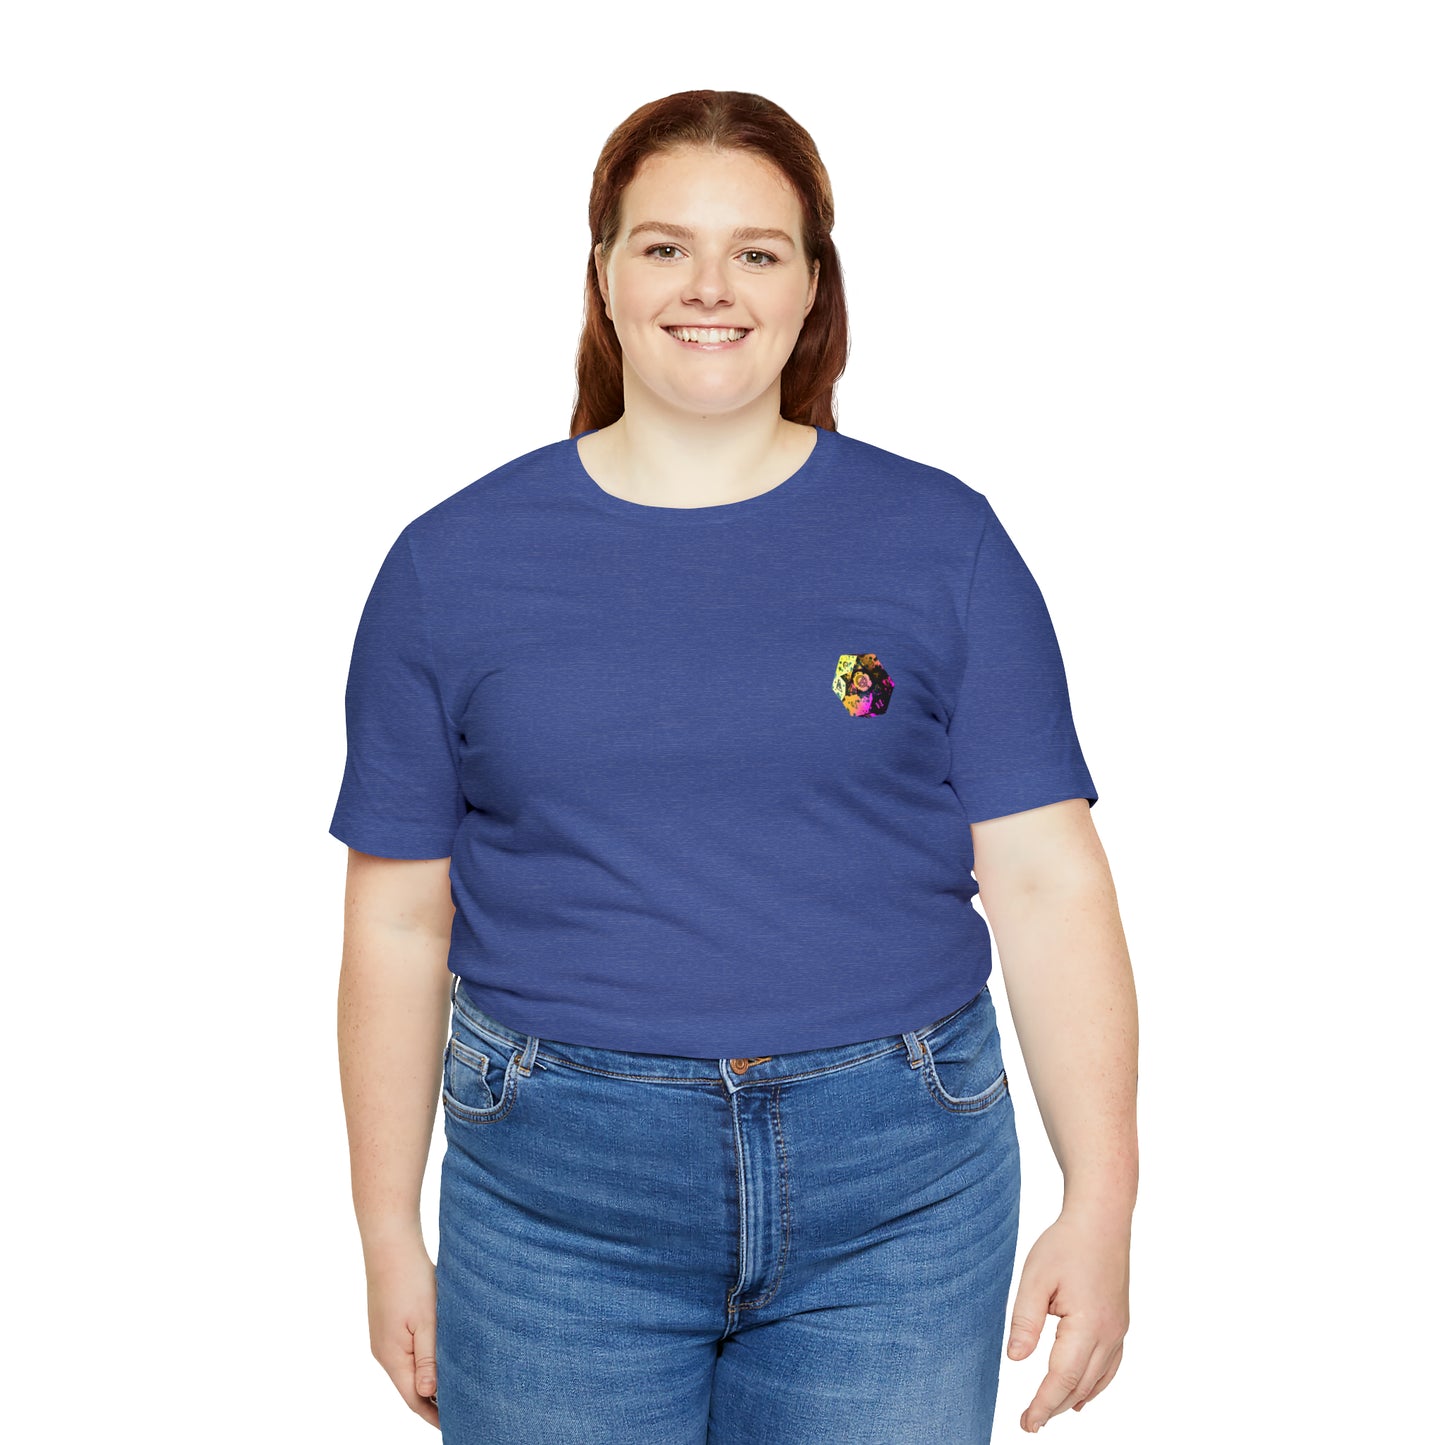 heather-true-royal-quest-thread-tee-shirt-with-small-neon-splatter-d20-dice-on-left-chest